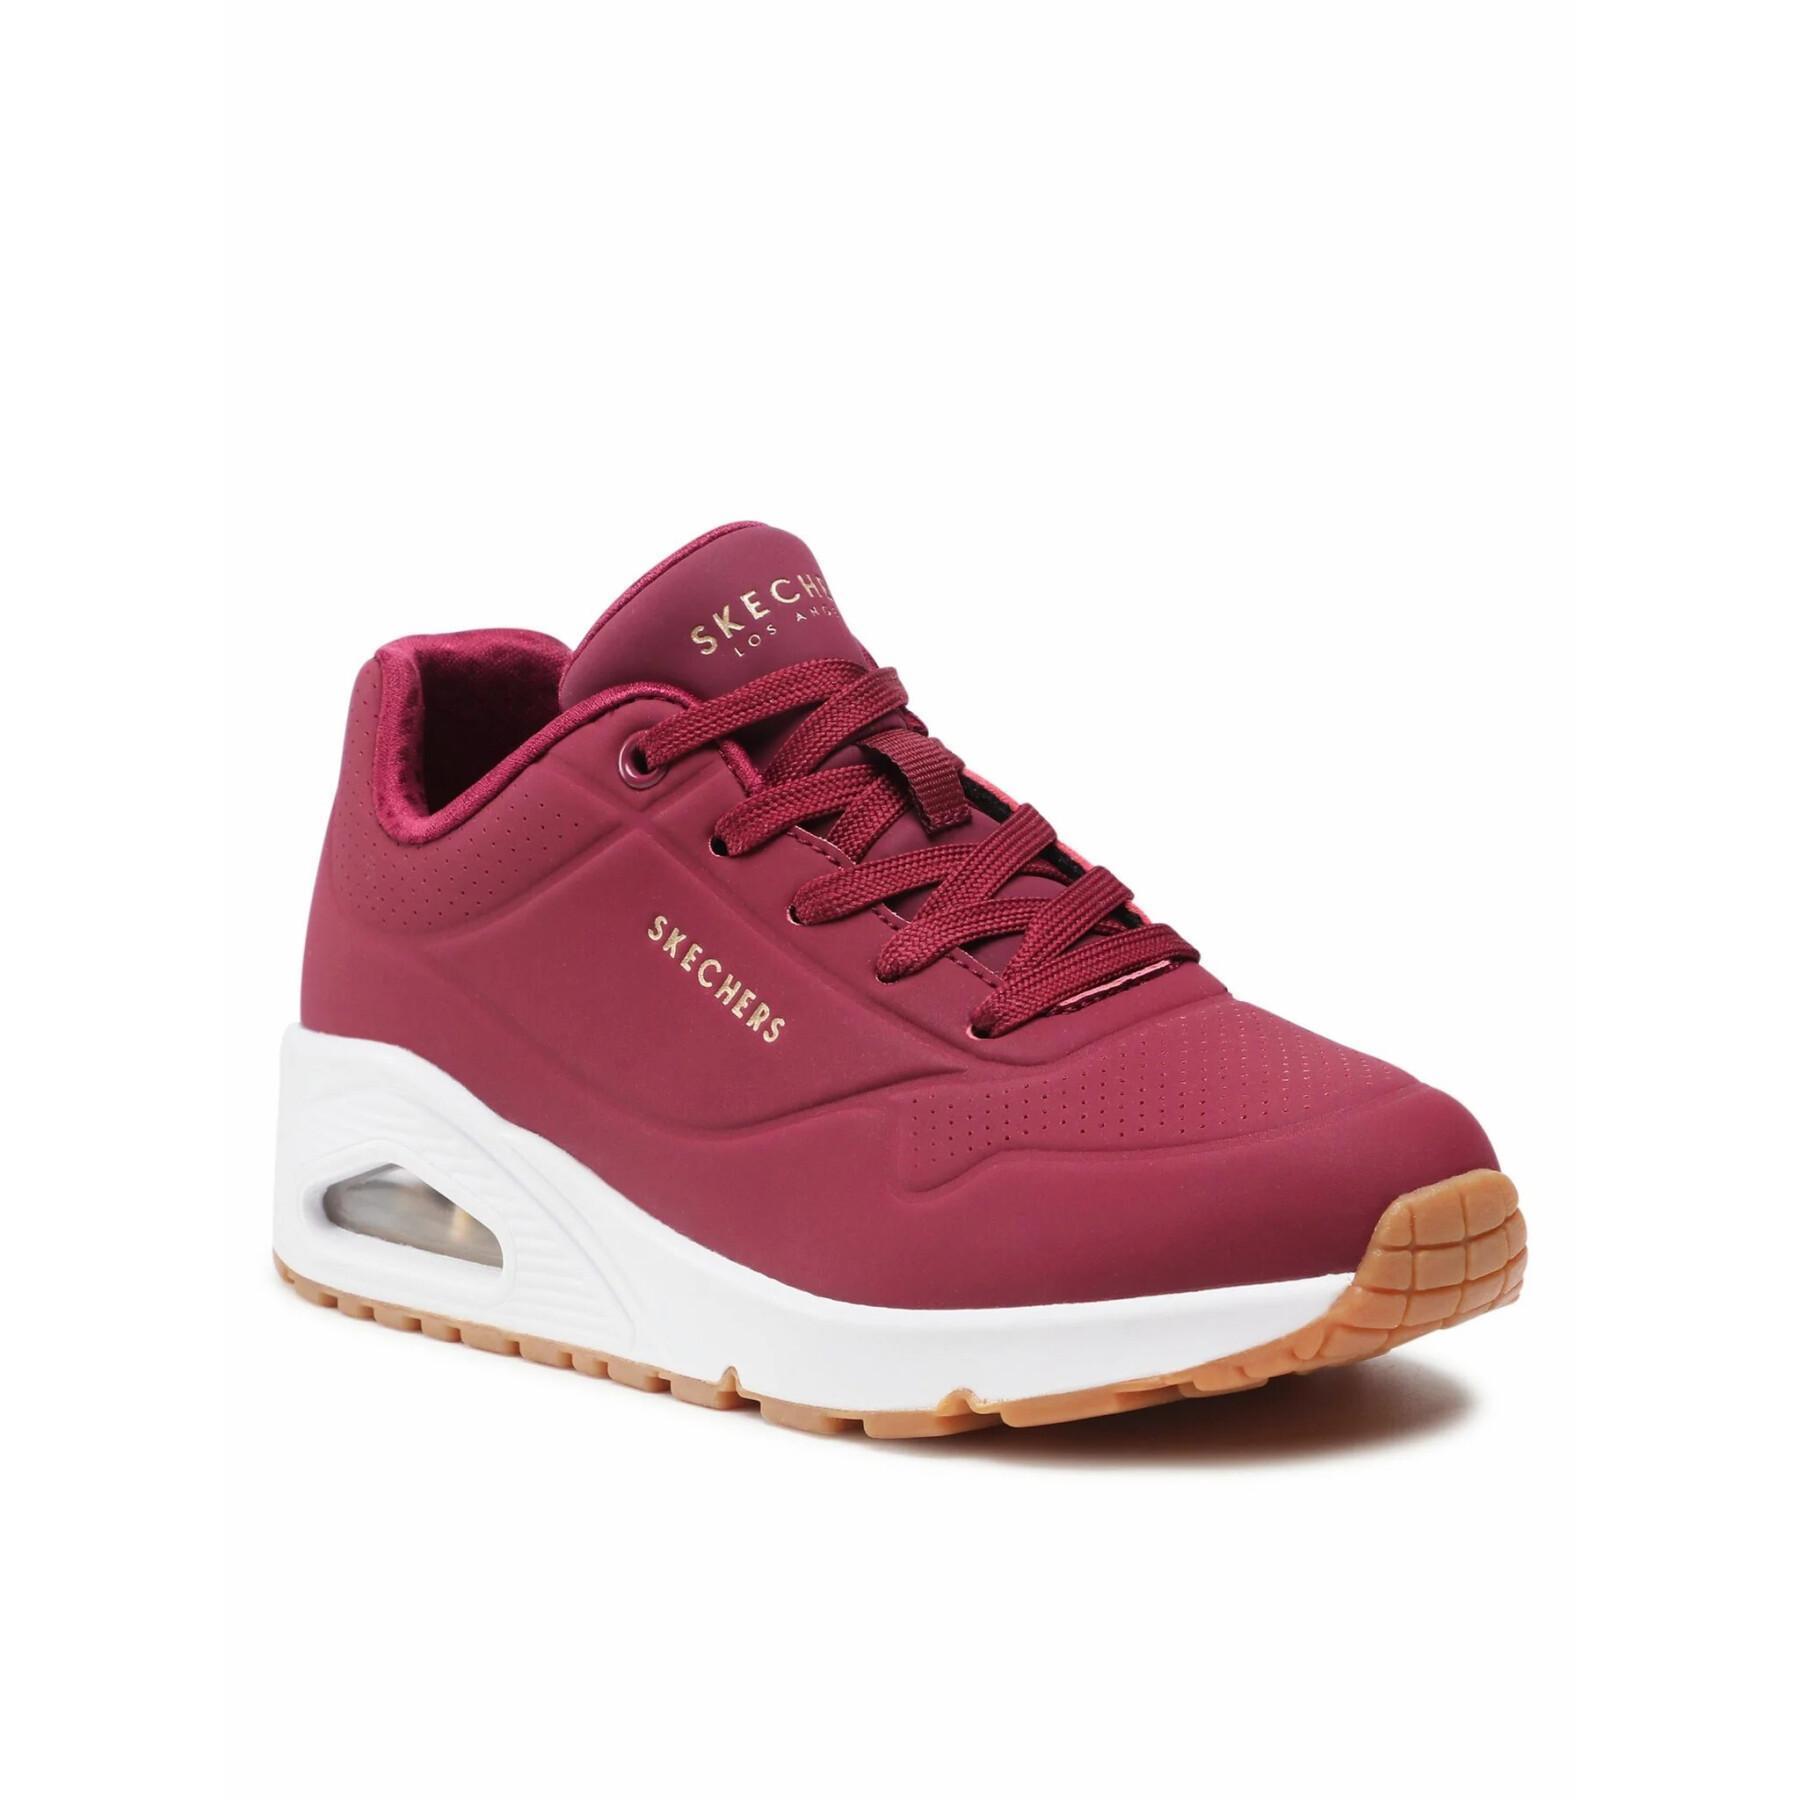 Formadoras de mulheres Skechers Uno-Stand On Air